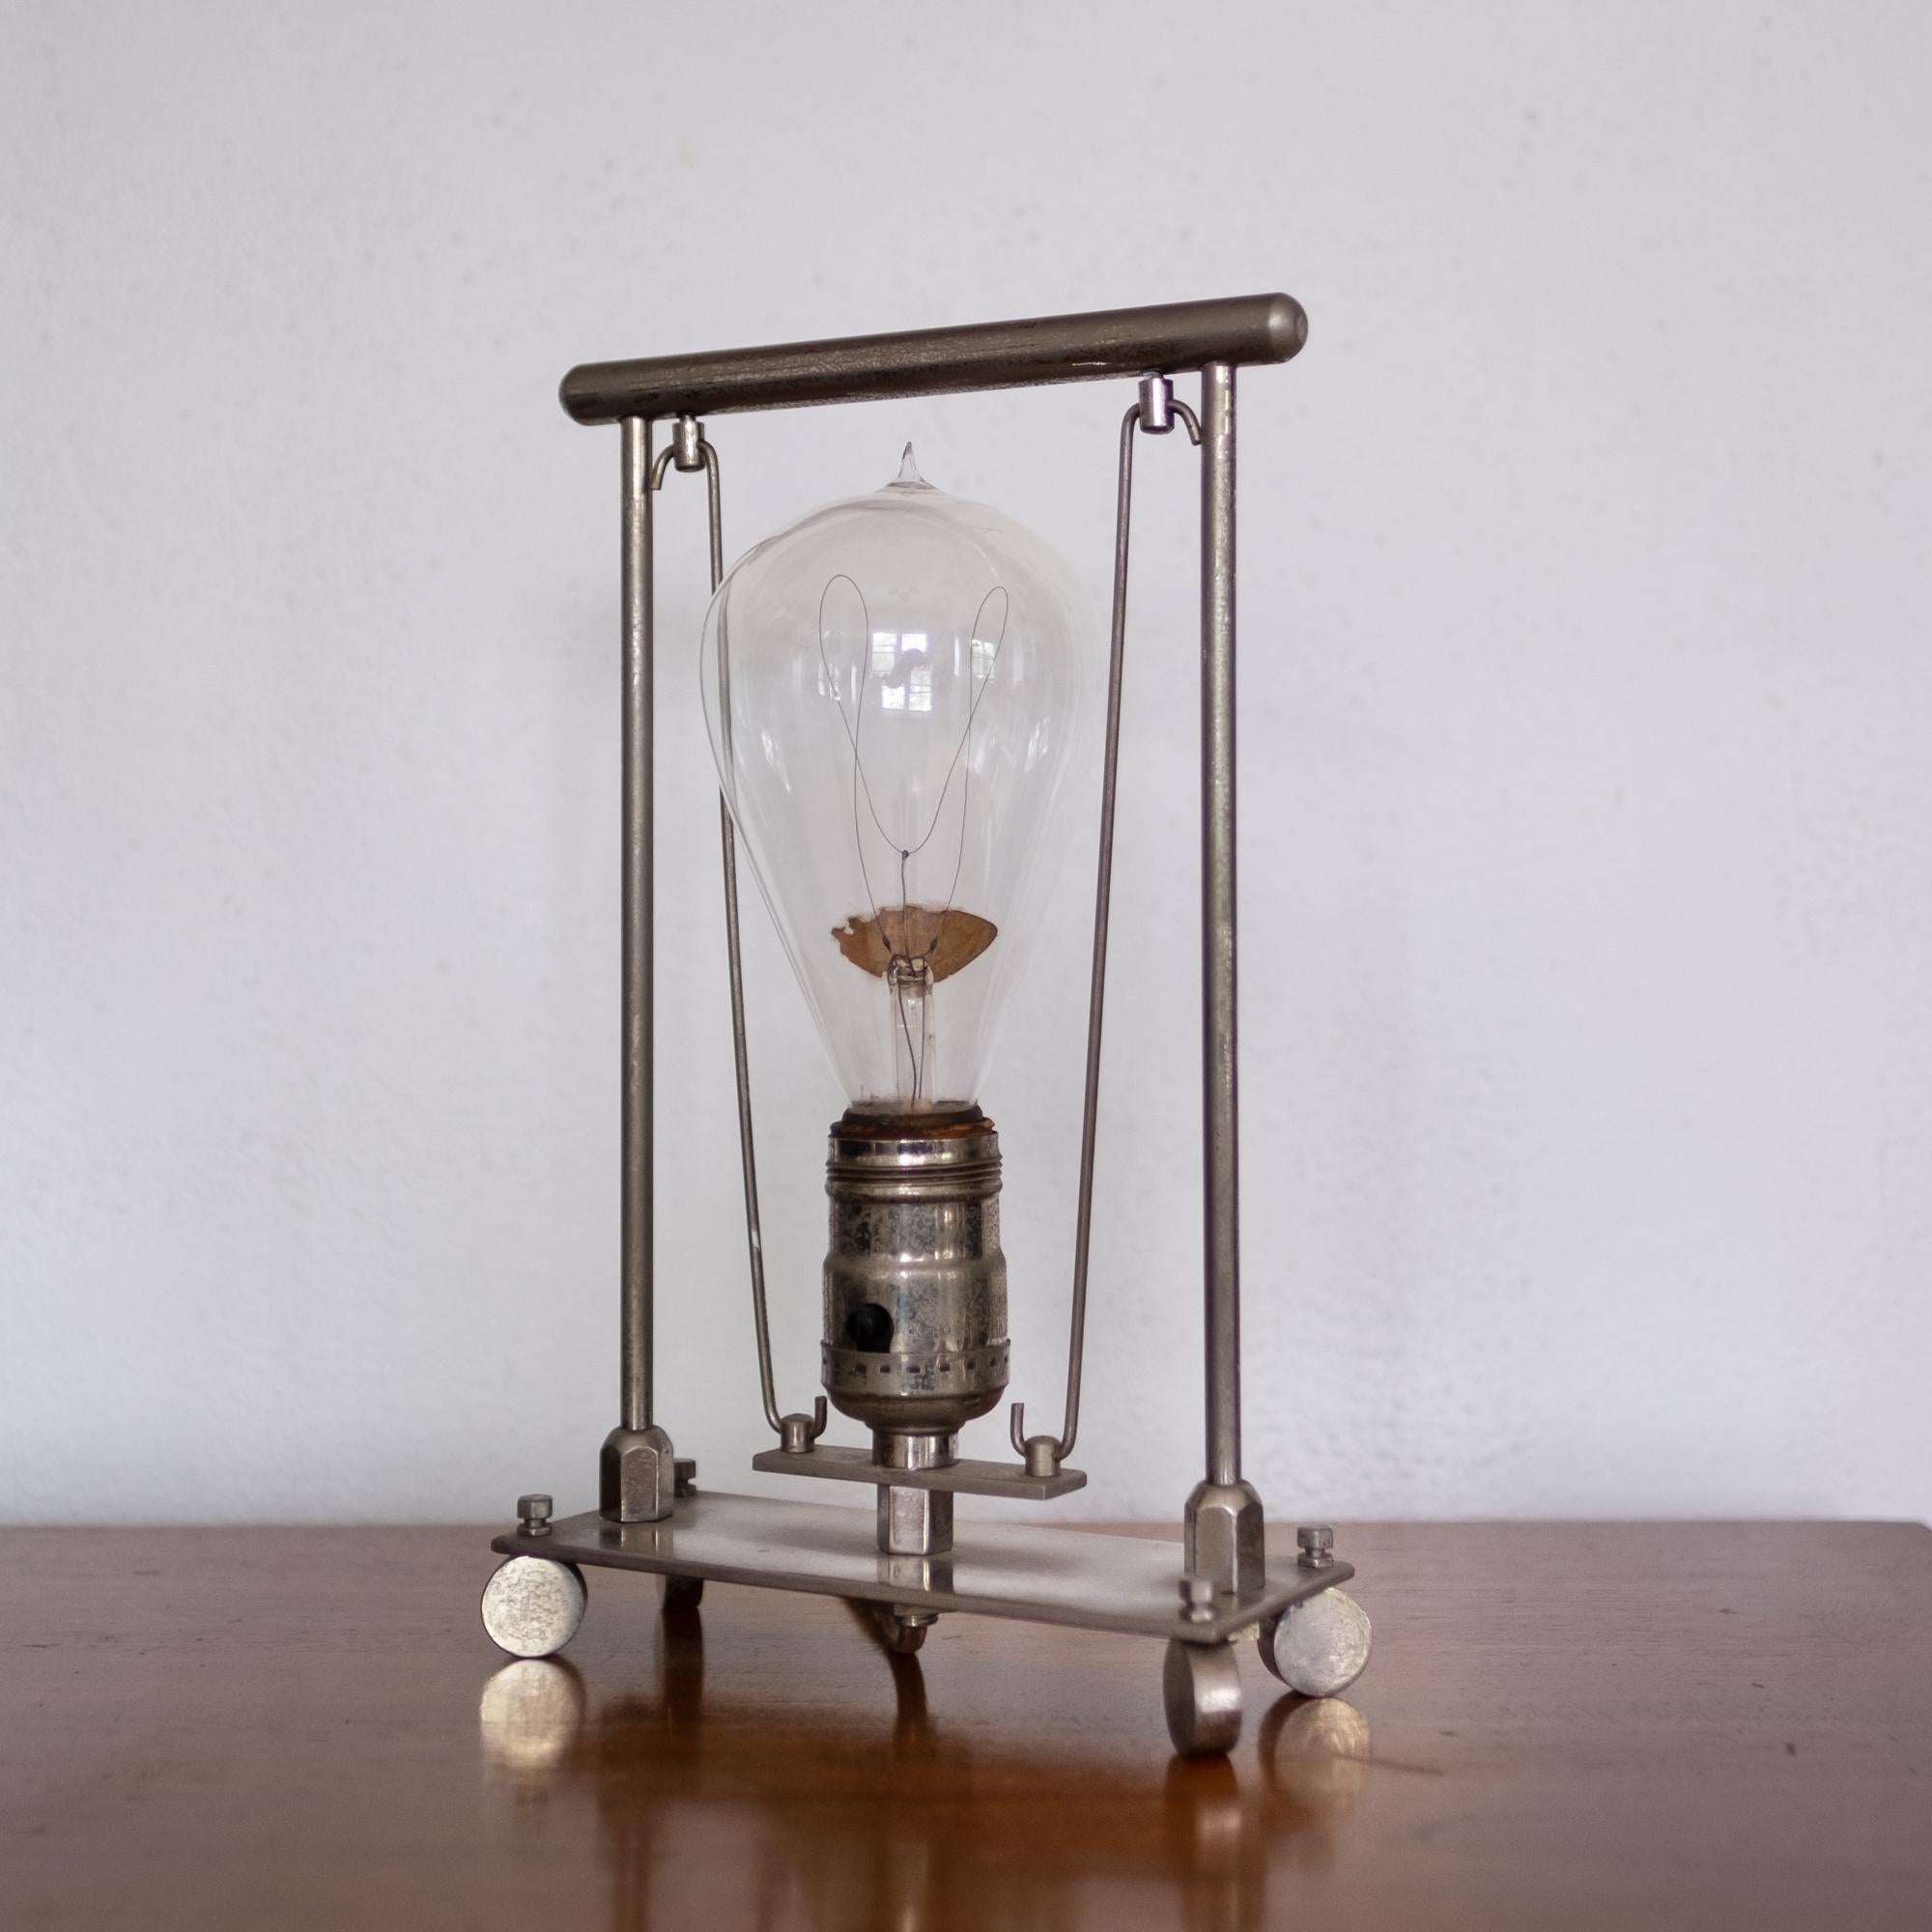 Early 1900s modernist lamp. Nickel-plated steel. Includes a NALCO carbon filament balloon bulb. Will take a modern bulb which would be recommended for daily use.